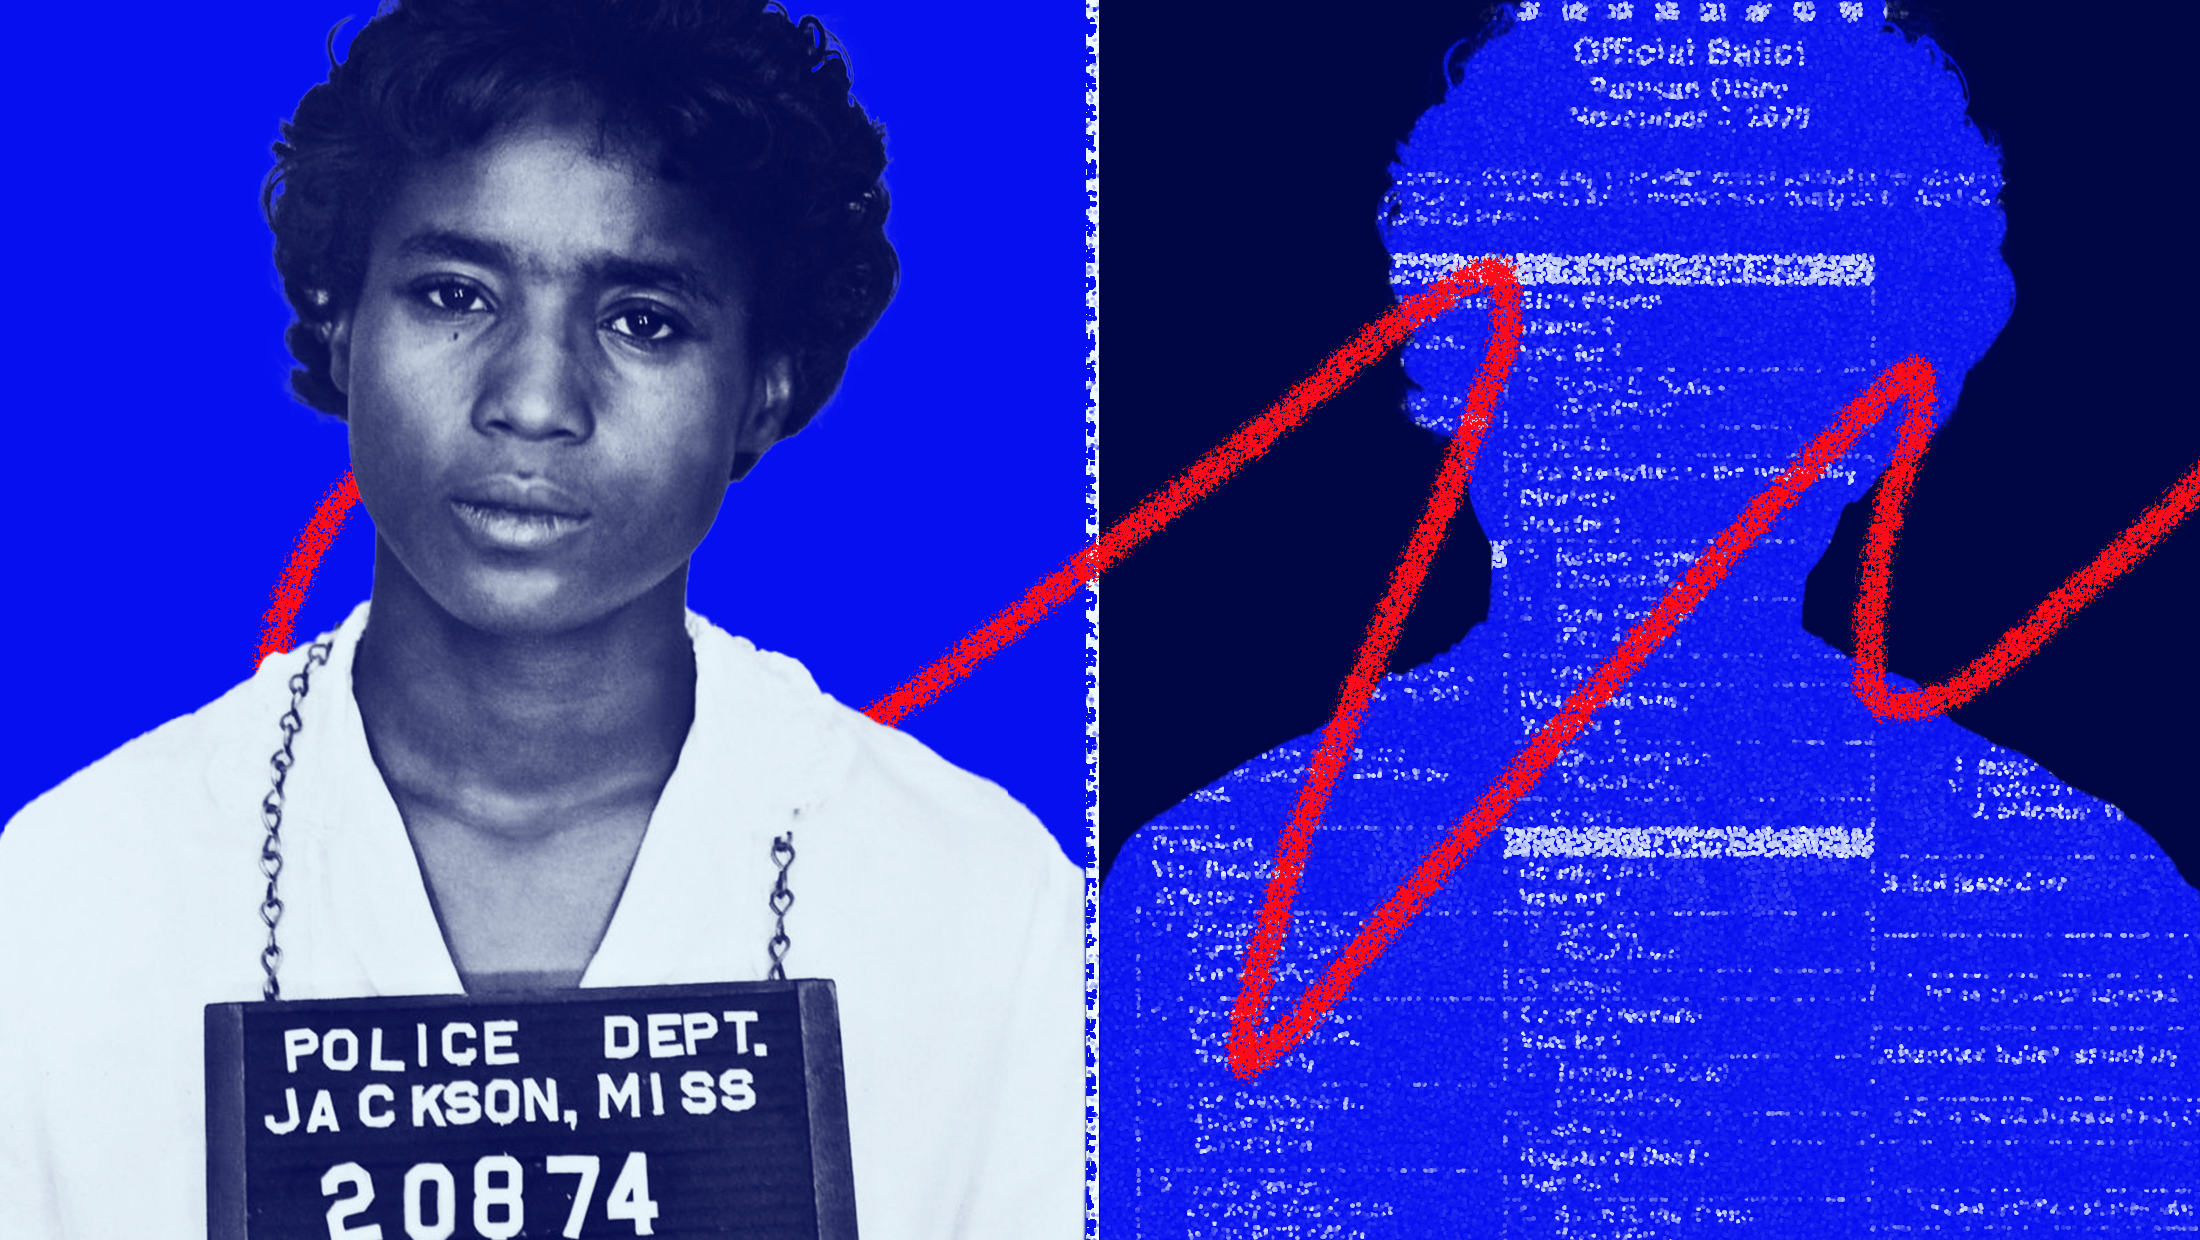 Blue background with a black and white mugshot of one of the Freedom Riders and a silouette on the right hand side with red scribble across the whole graphic.